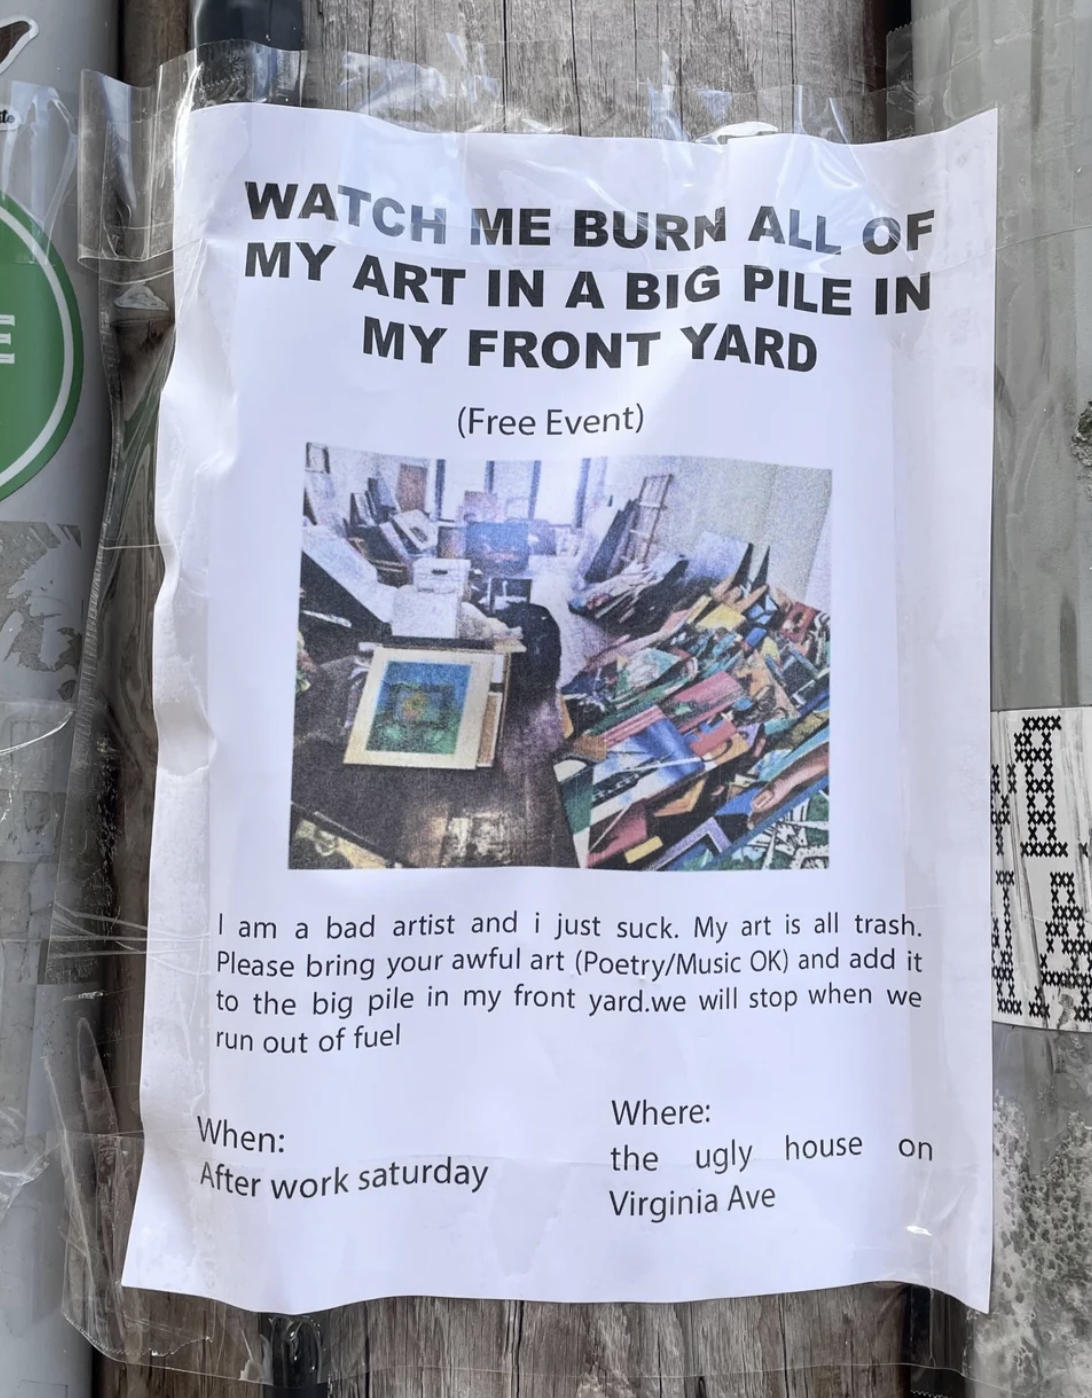 Flyer for a free event where an artist plans to burn their art, with a photo of art pieces and supplies